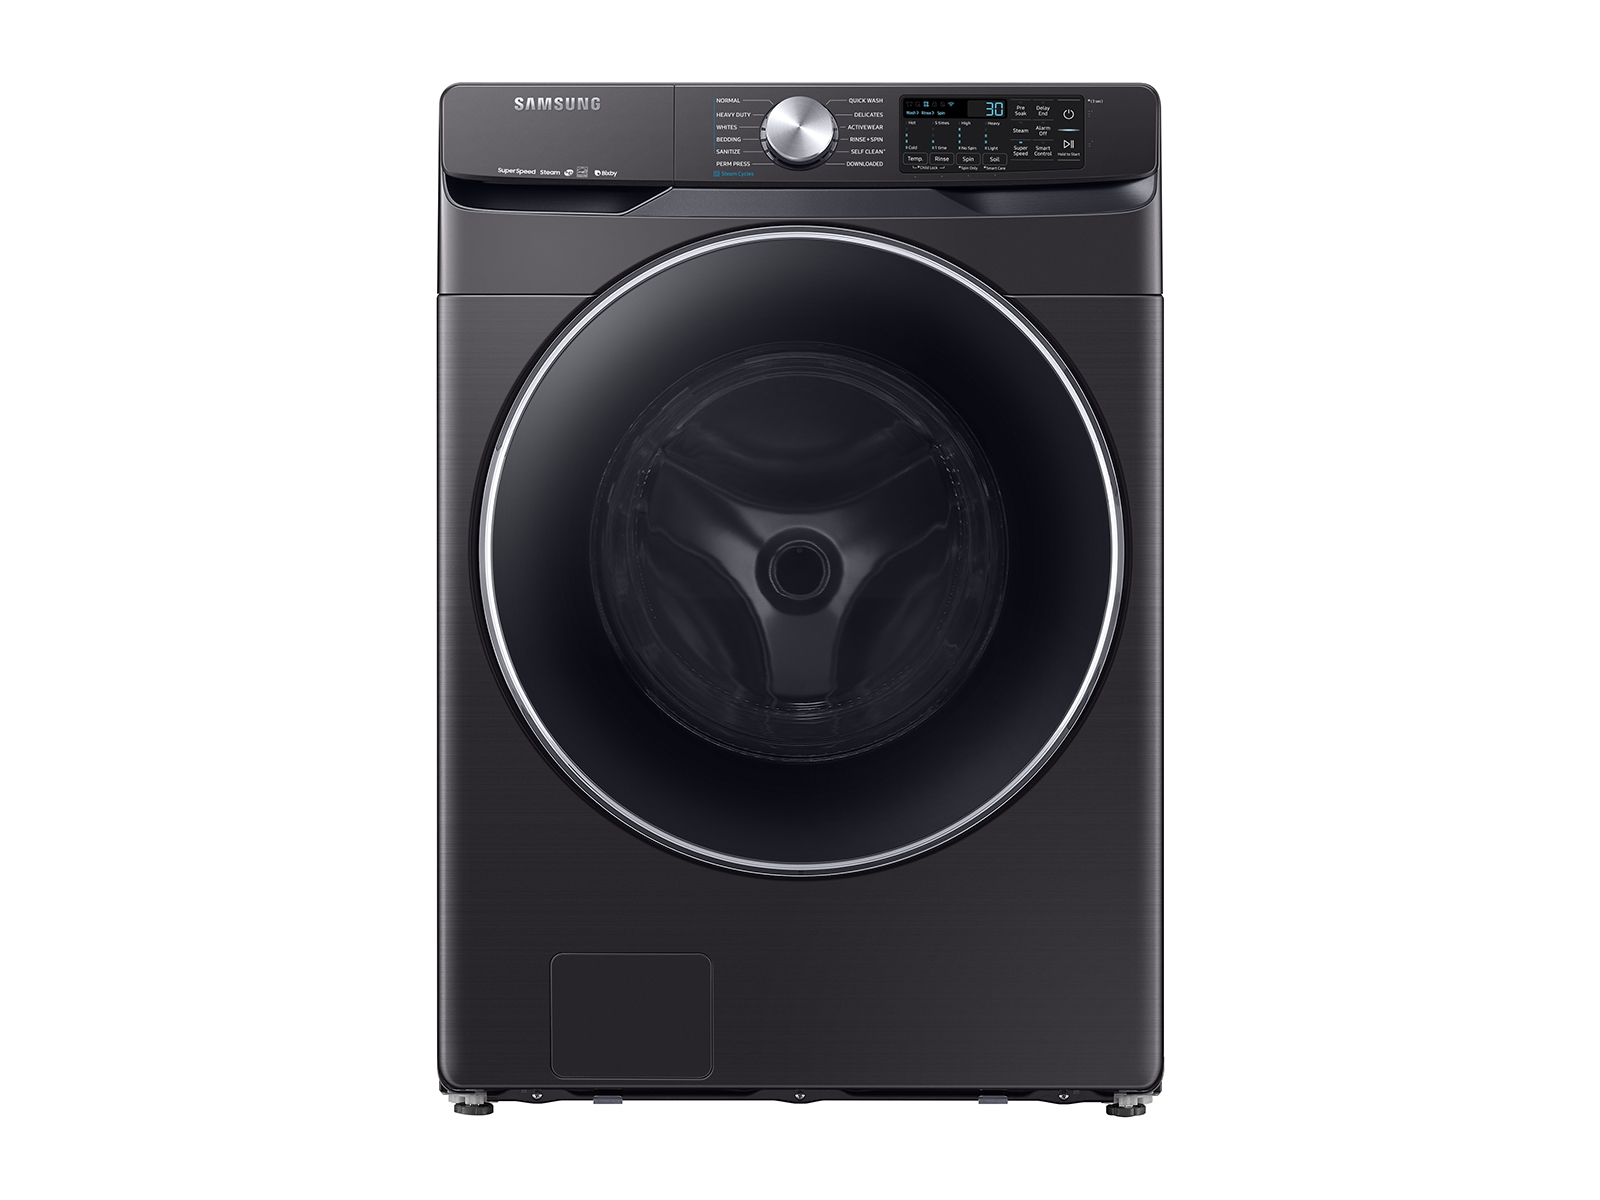 Photos - Washing Machine Samsung 4.5 cu. ft. Smart Front Load Washer with Super Speed in Black Stai 